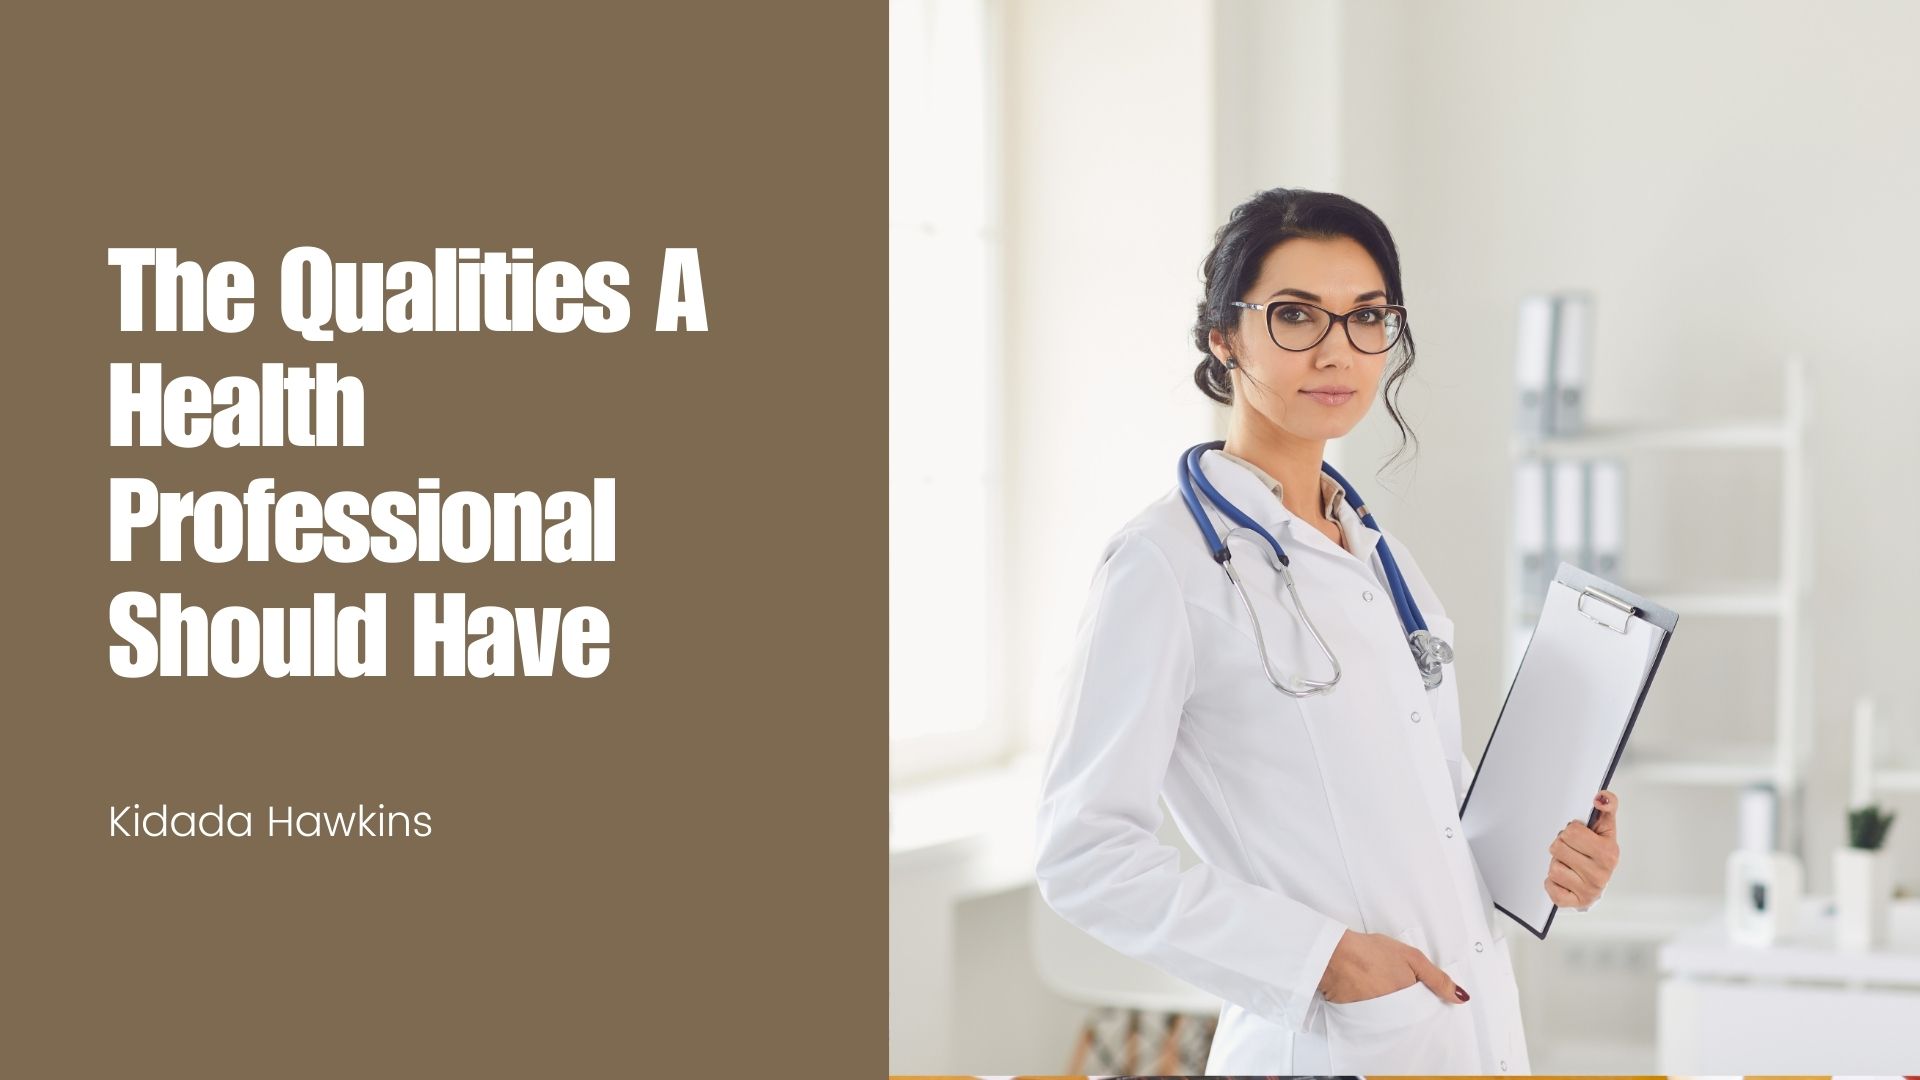 The Qualities A Health Professional Should Have